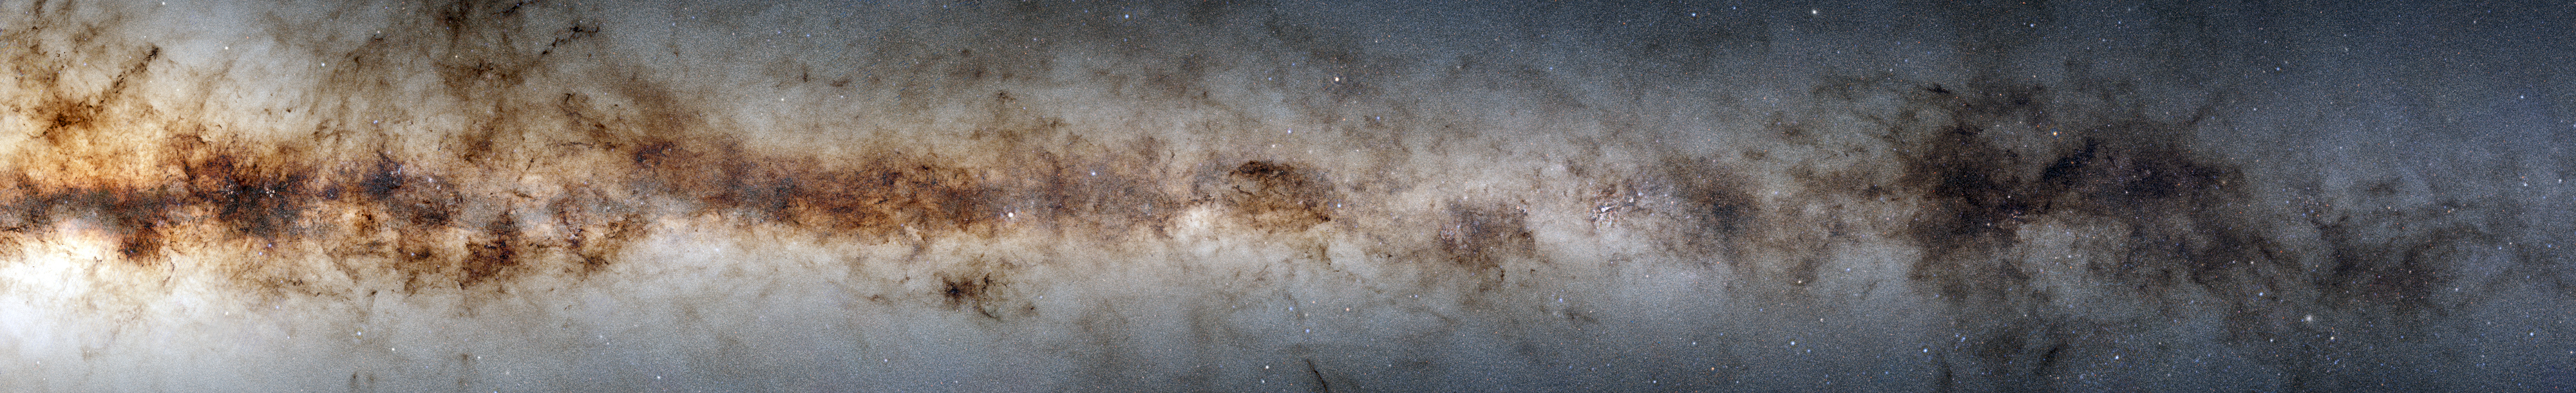 The galactic plane of the Milky Way galaxy. /AP